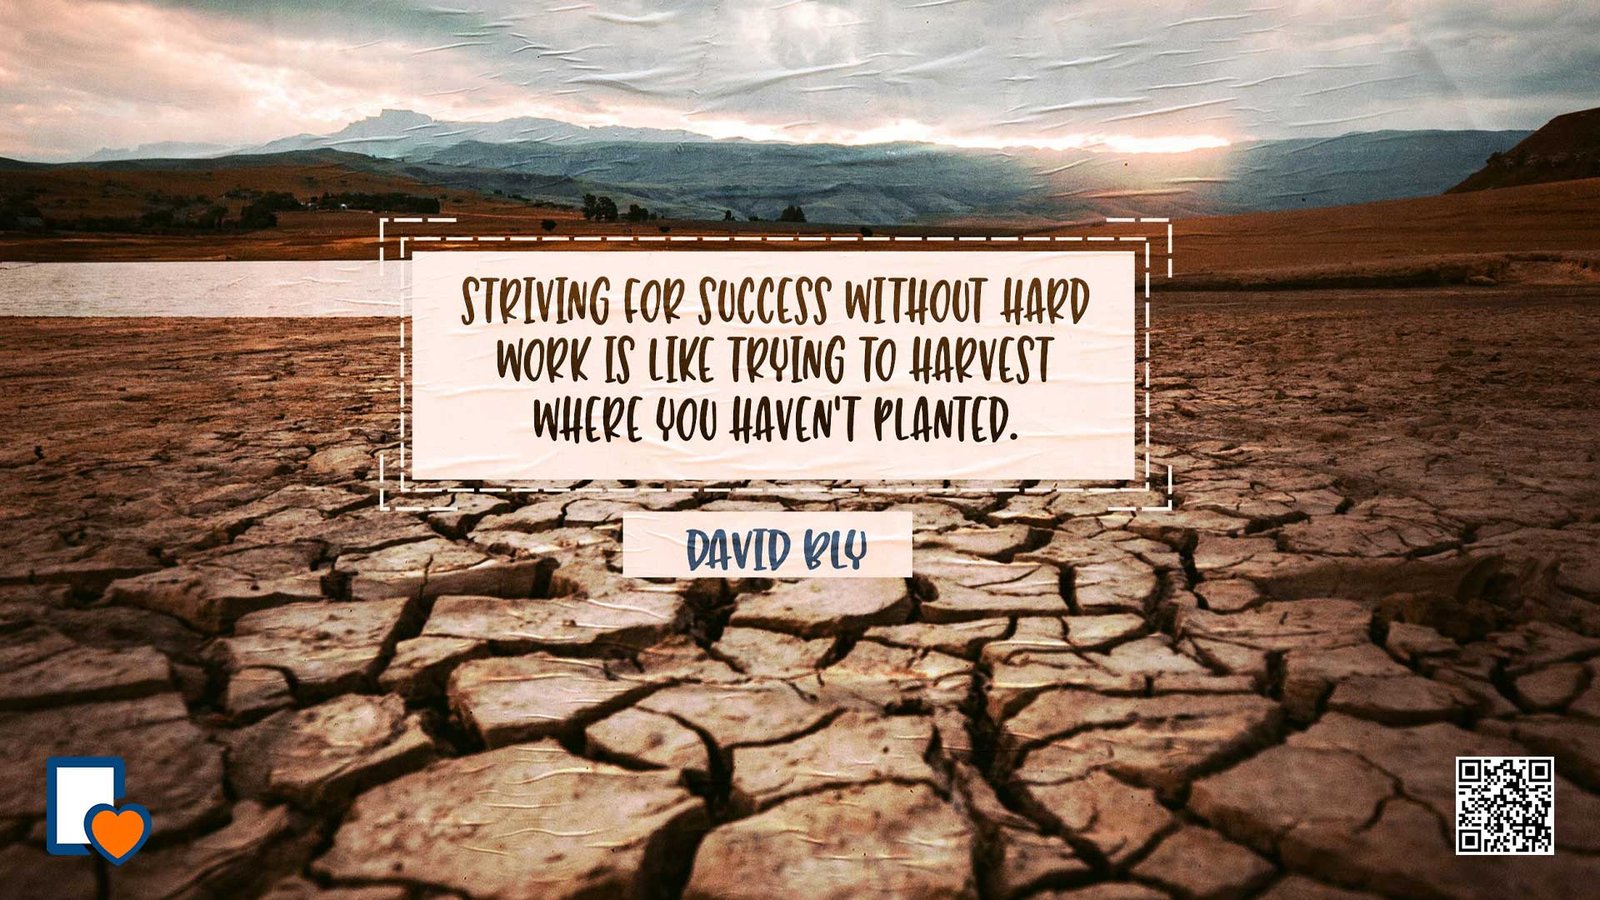 Striving For Success Without Hard Work Is Like Trying To Harvest Where You Haven't Planted. -David Bly